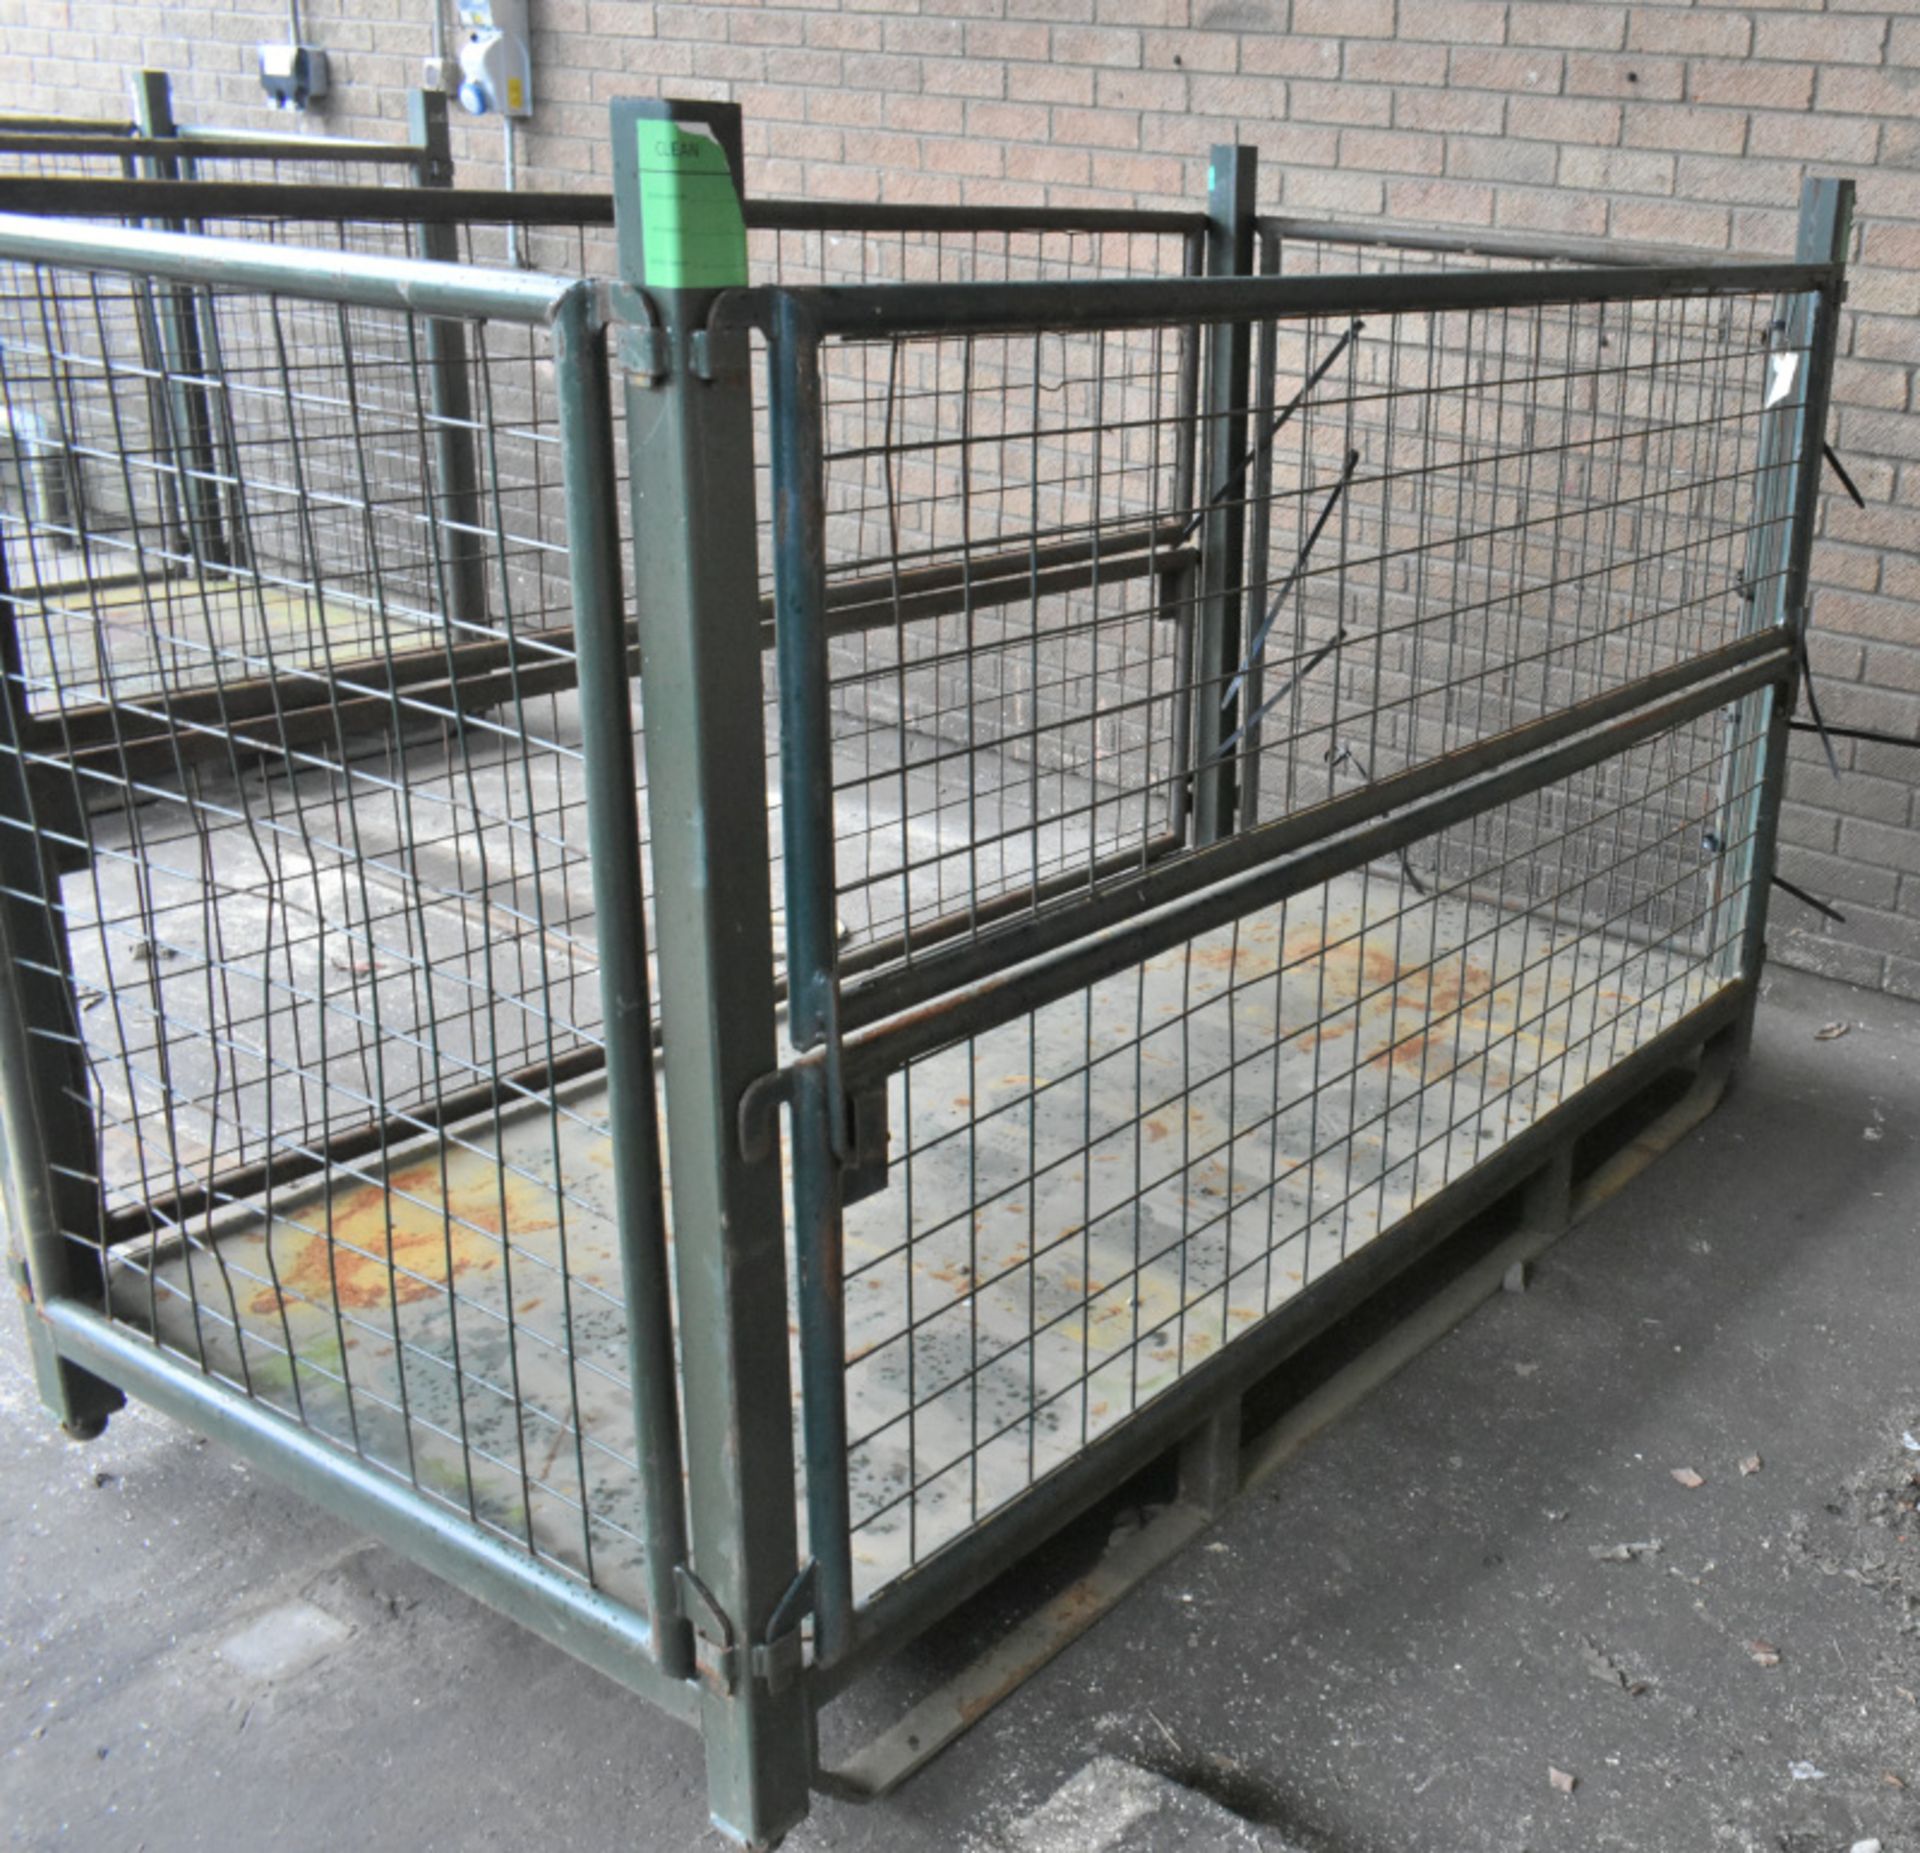 Longspan Metal Stillage - External dimensions L213 x W113 x H143cm - PLEASE SEE PICTURES FOR CONDITI - Image 3 of 3